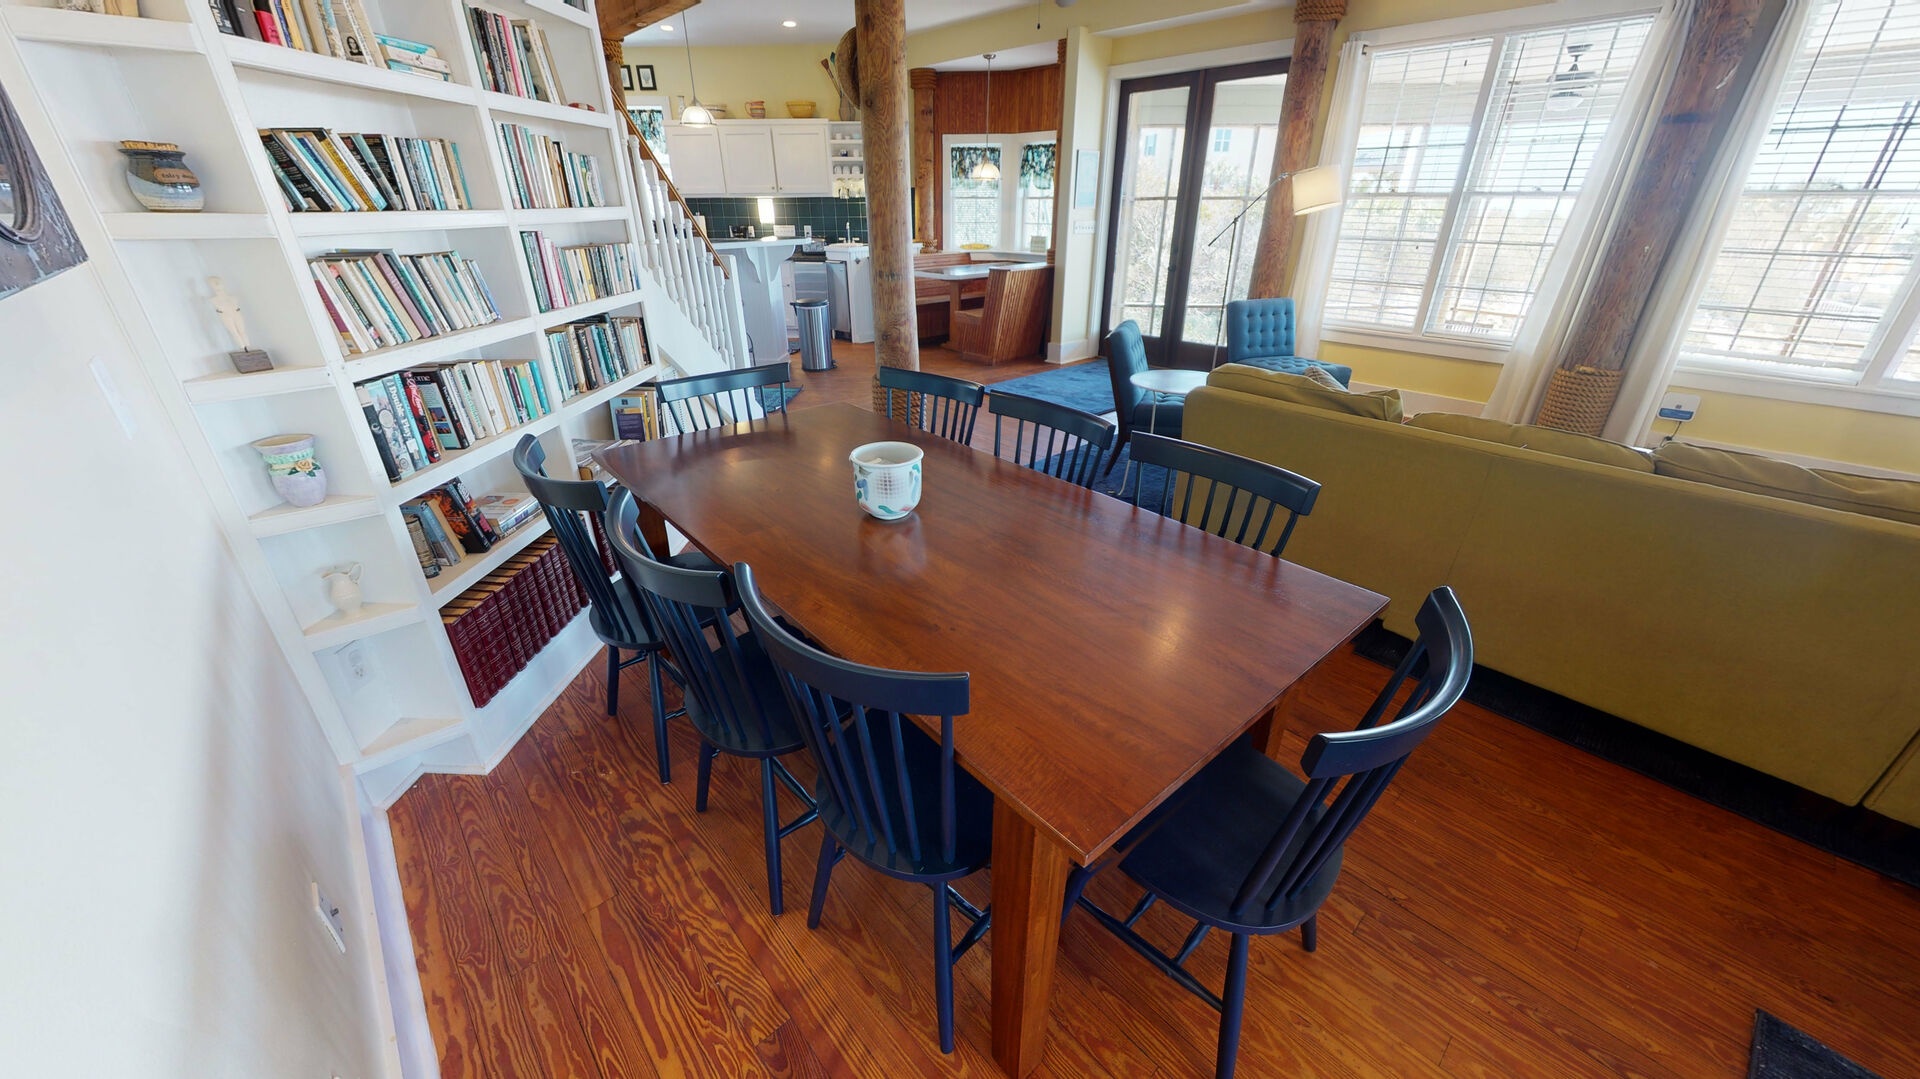 Open concept dining area with seating for 8